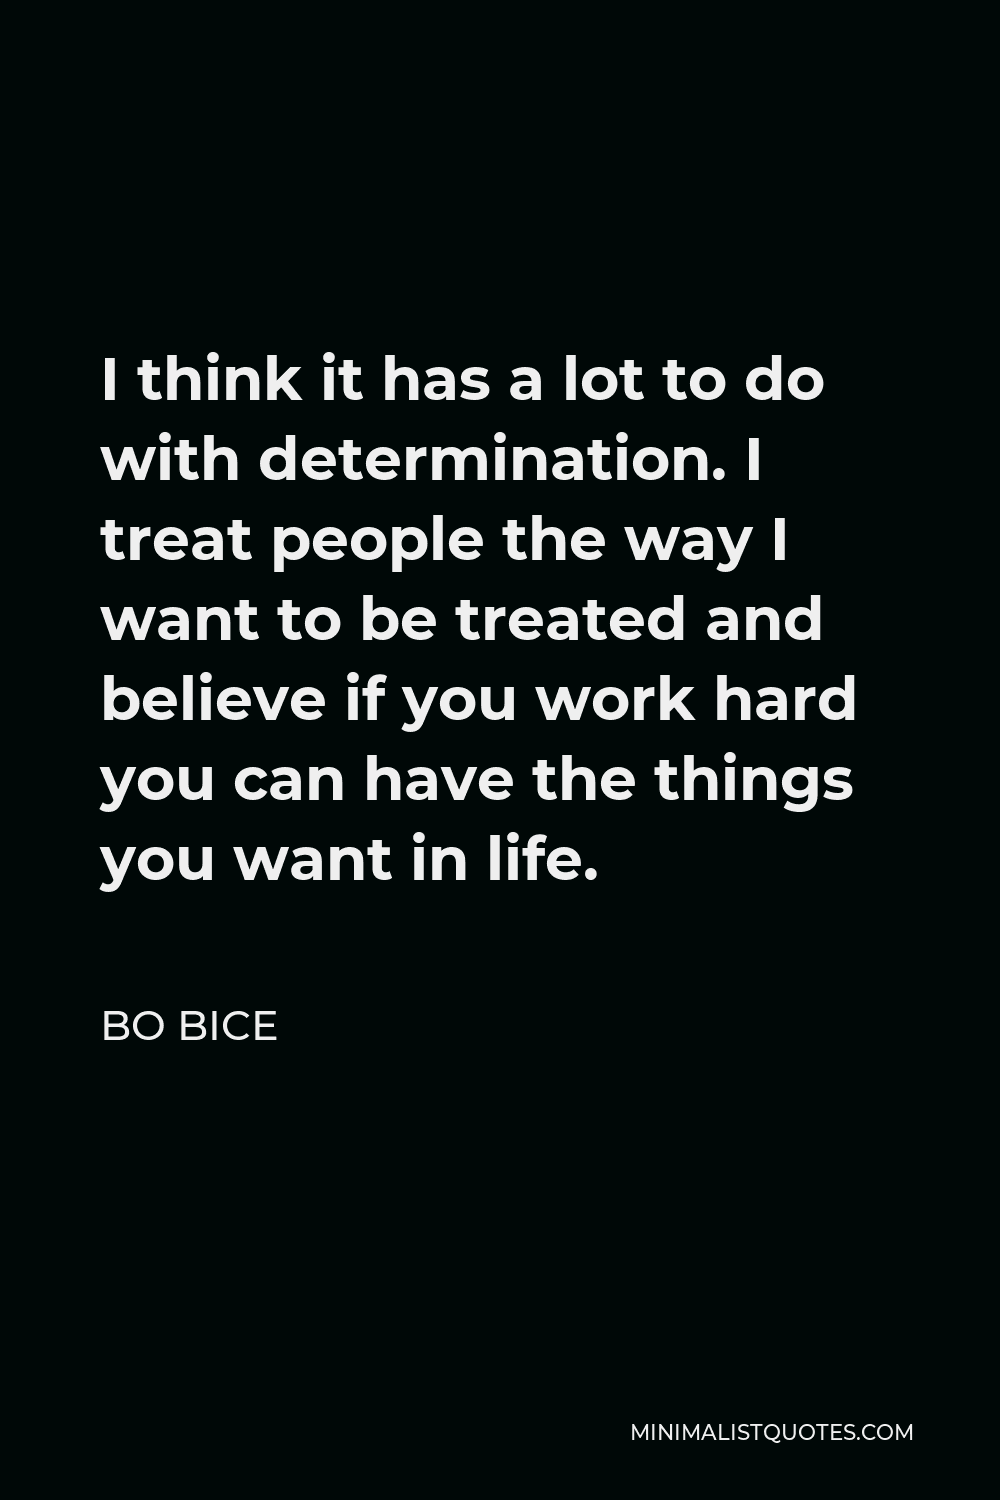 Bo Bice Quote - I think it has a lot to do with determination. I treat people the way I want to be treated and believe if you work hard you can have the things you want in life.